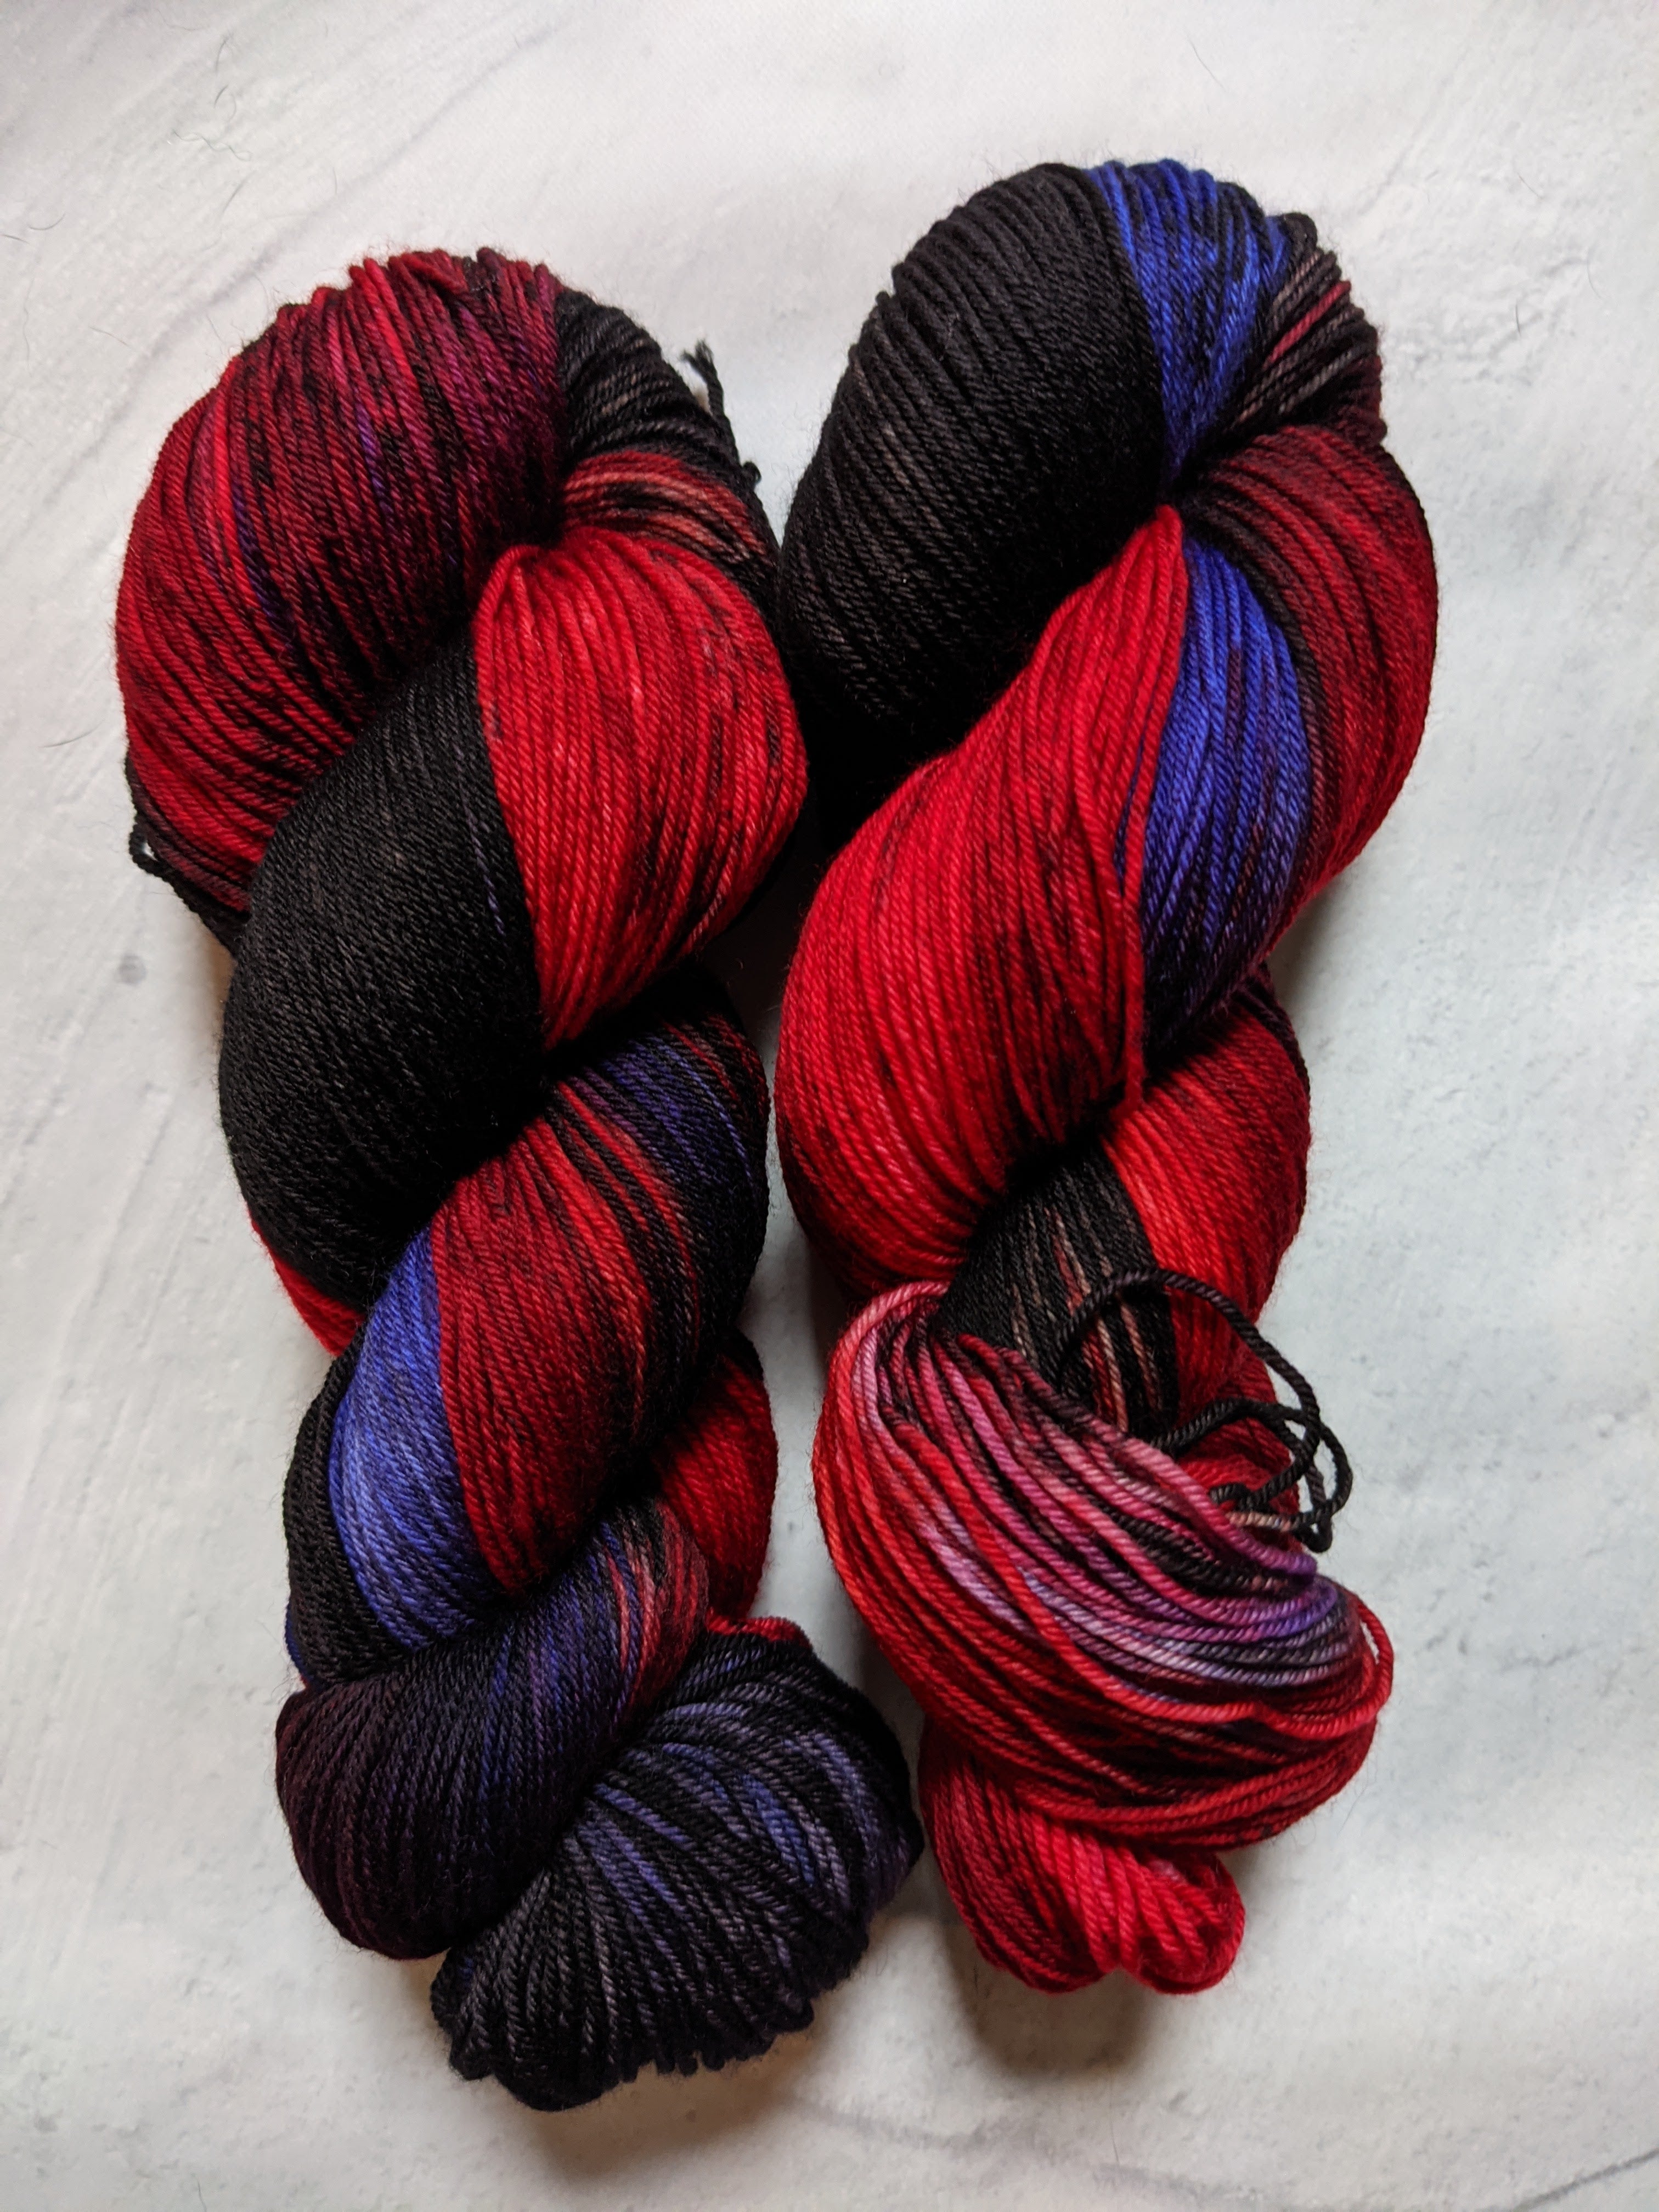 Red and Black Yarn 